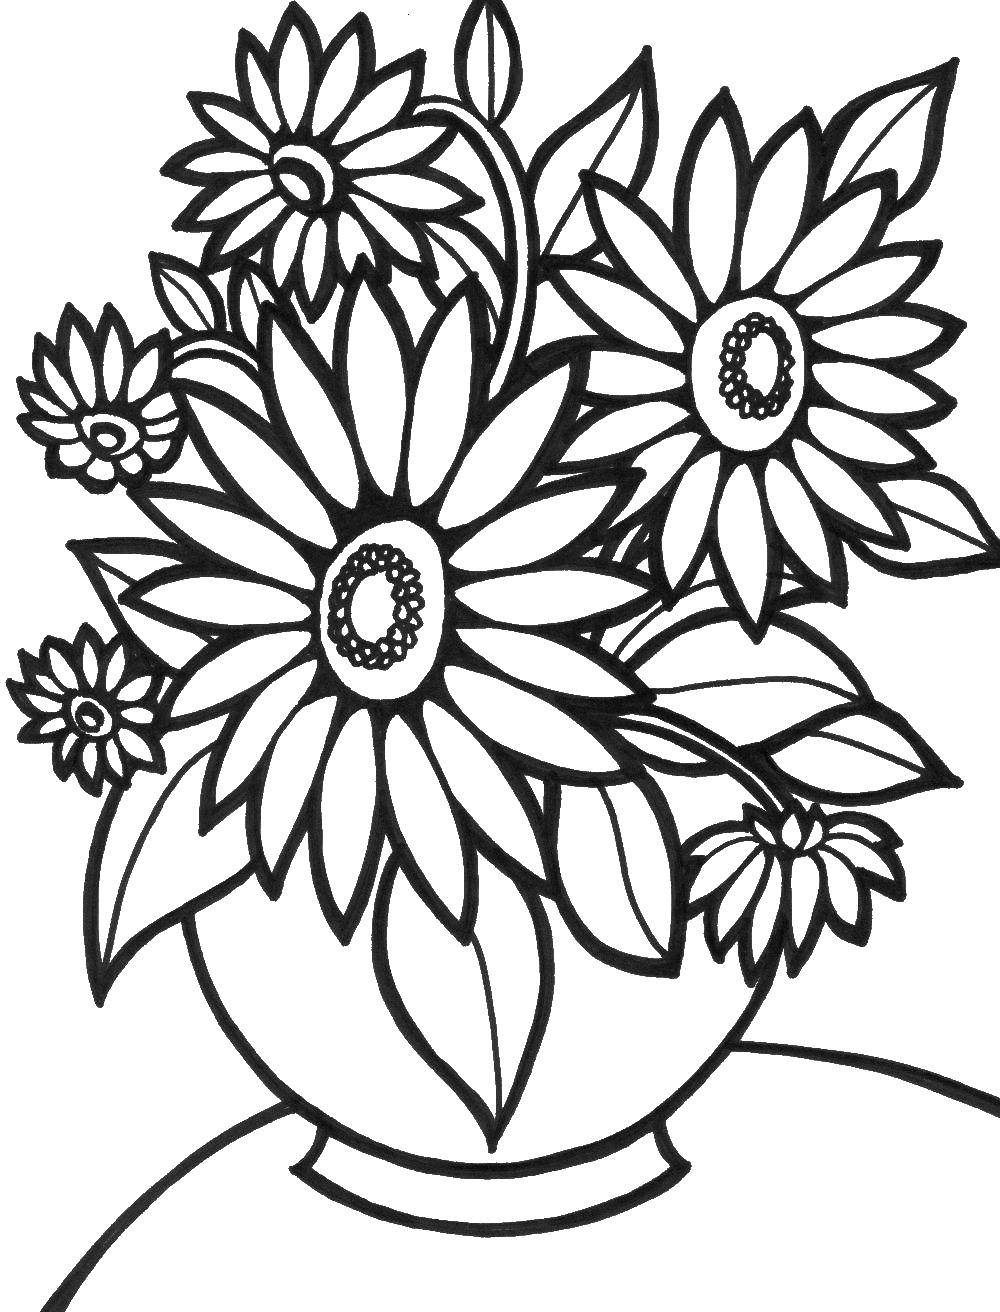 Coloring Vase with flowers. Category Flowers. Tags:  vase, table, flowers.